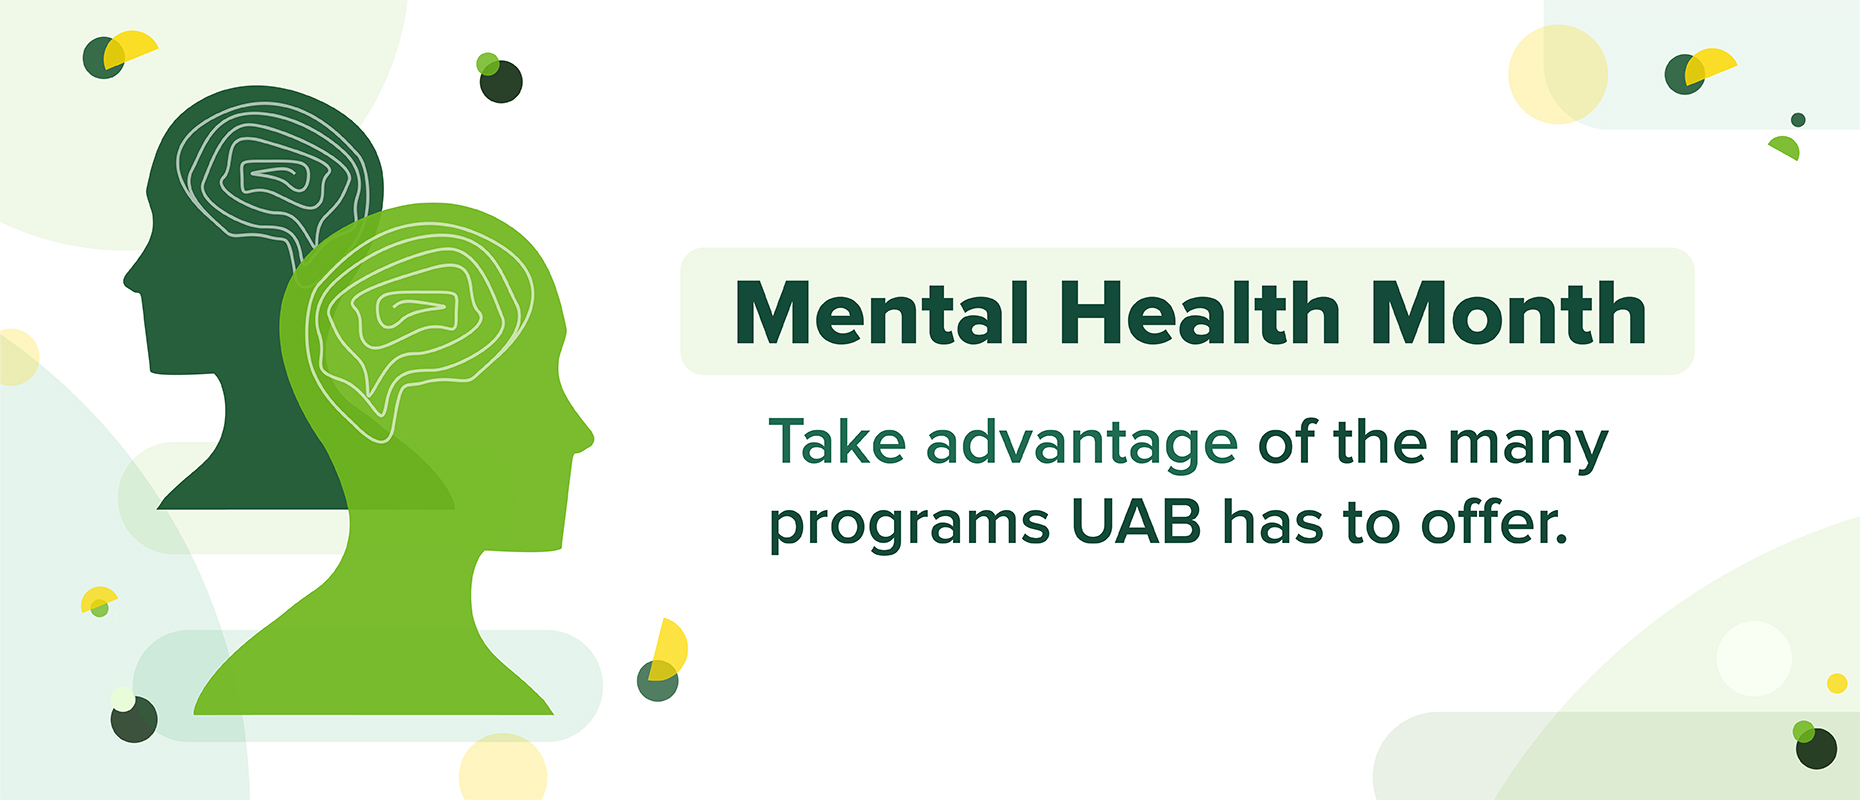 Mental Health Month: Take advantage of the many programs UAB has to offer.